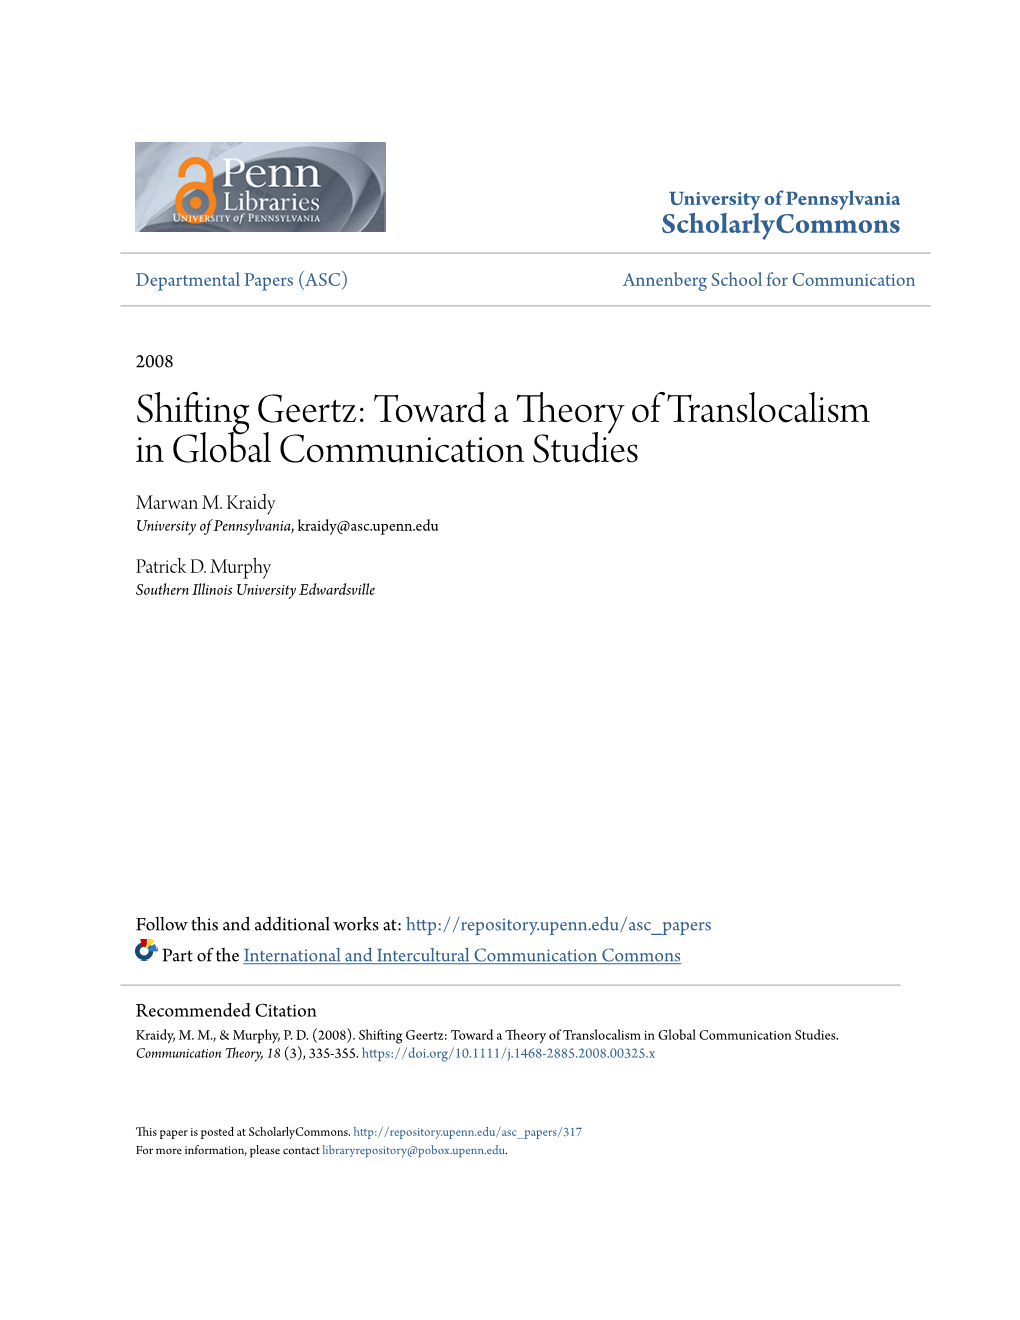 Shifting Geertz: Toward a Theory of Translocalism in Global Communication Studies Marwan M